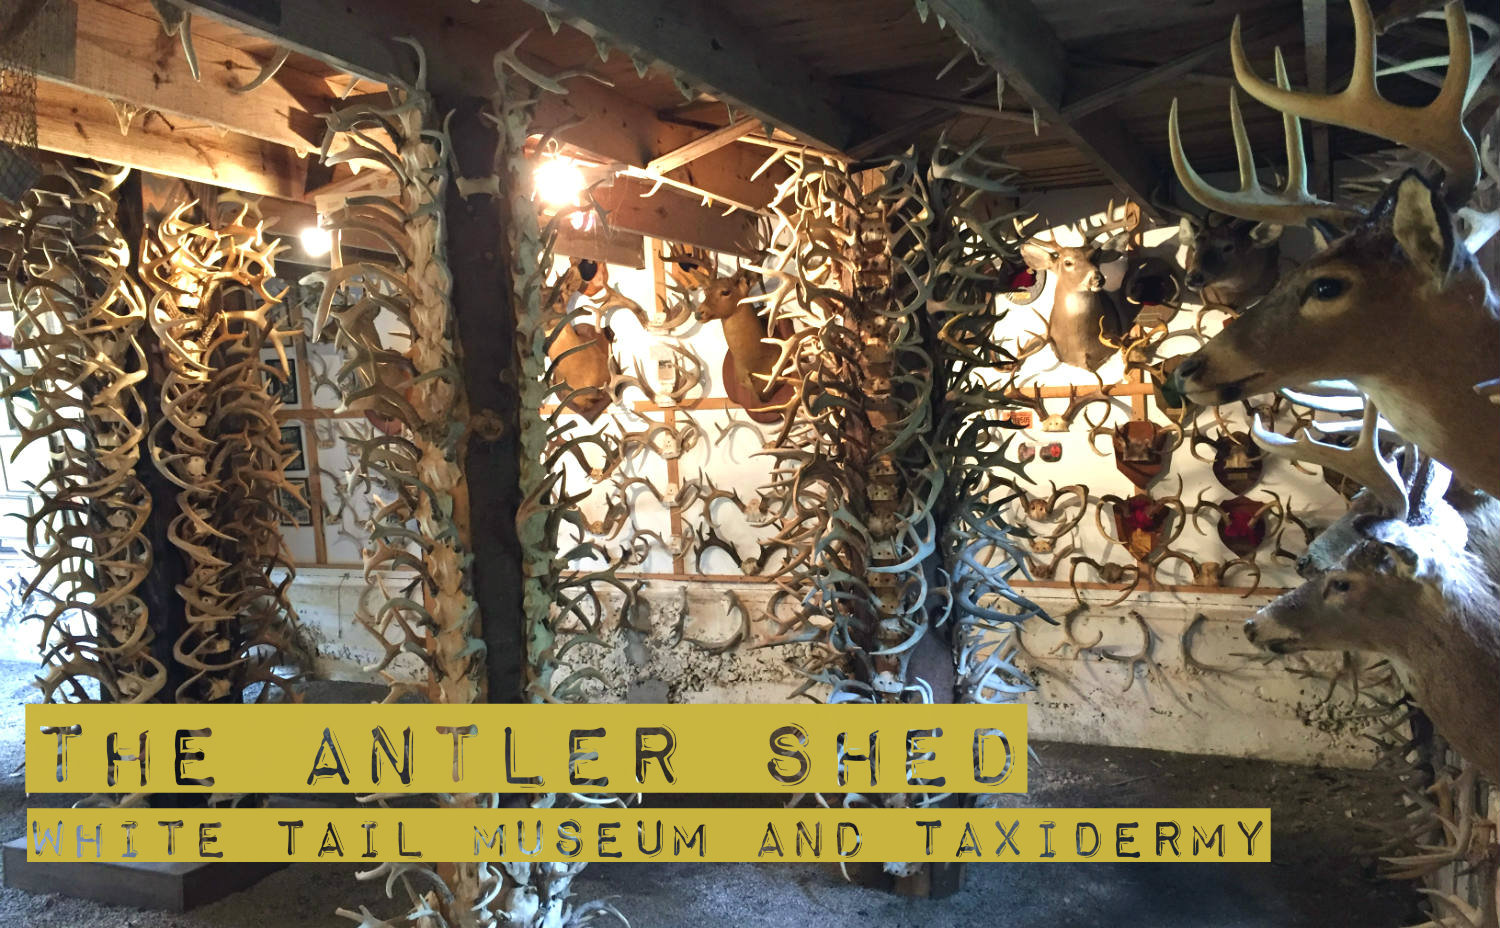 Antler Shed White Tail Museum - Featured Image